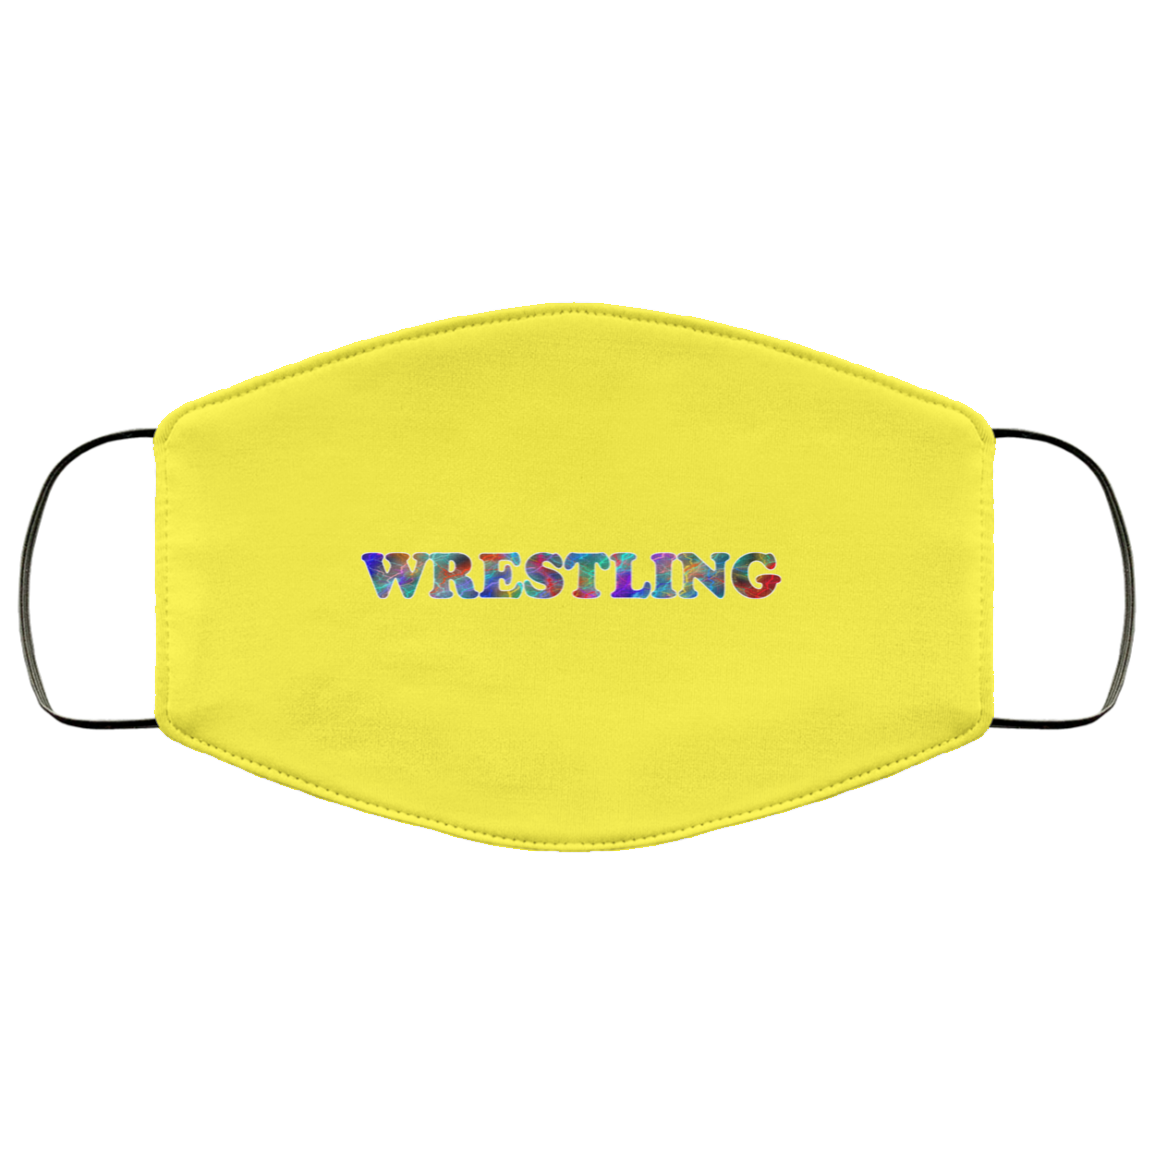 Wrestling 2 Layer Protective Mask